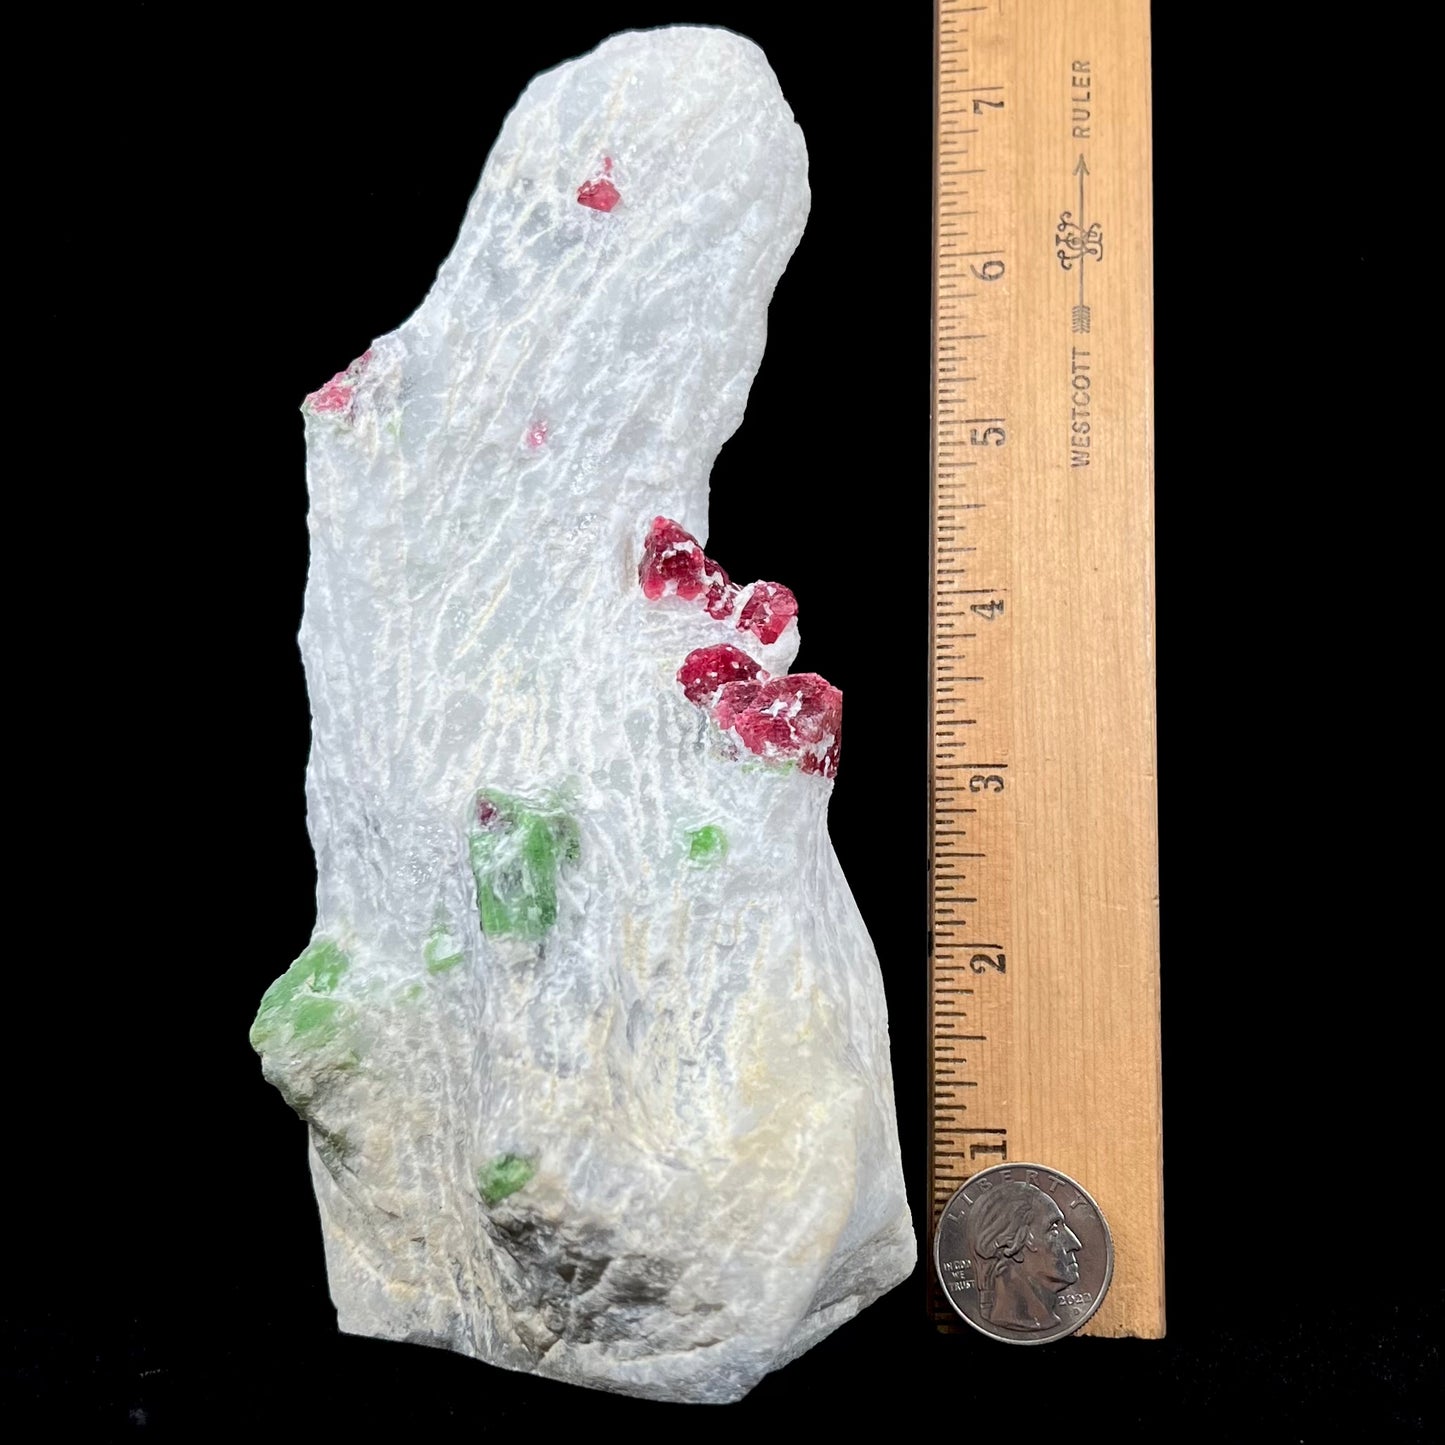 A white calcite specimen embedded with red spinel and green pargasite crystals from Luc Yen District, Vietnam.